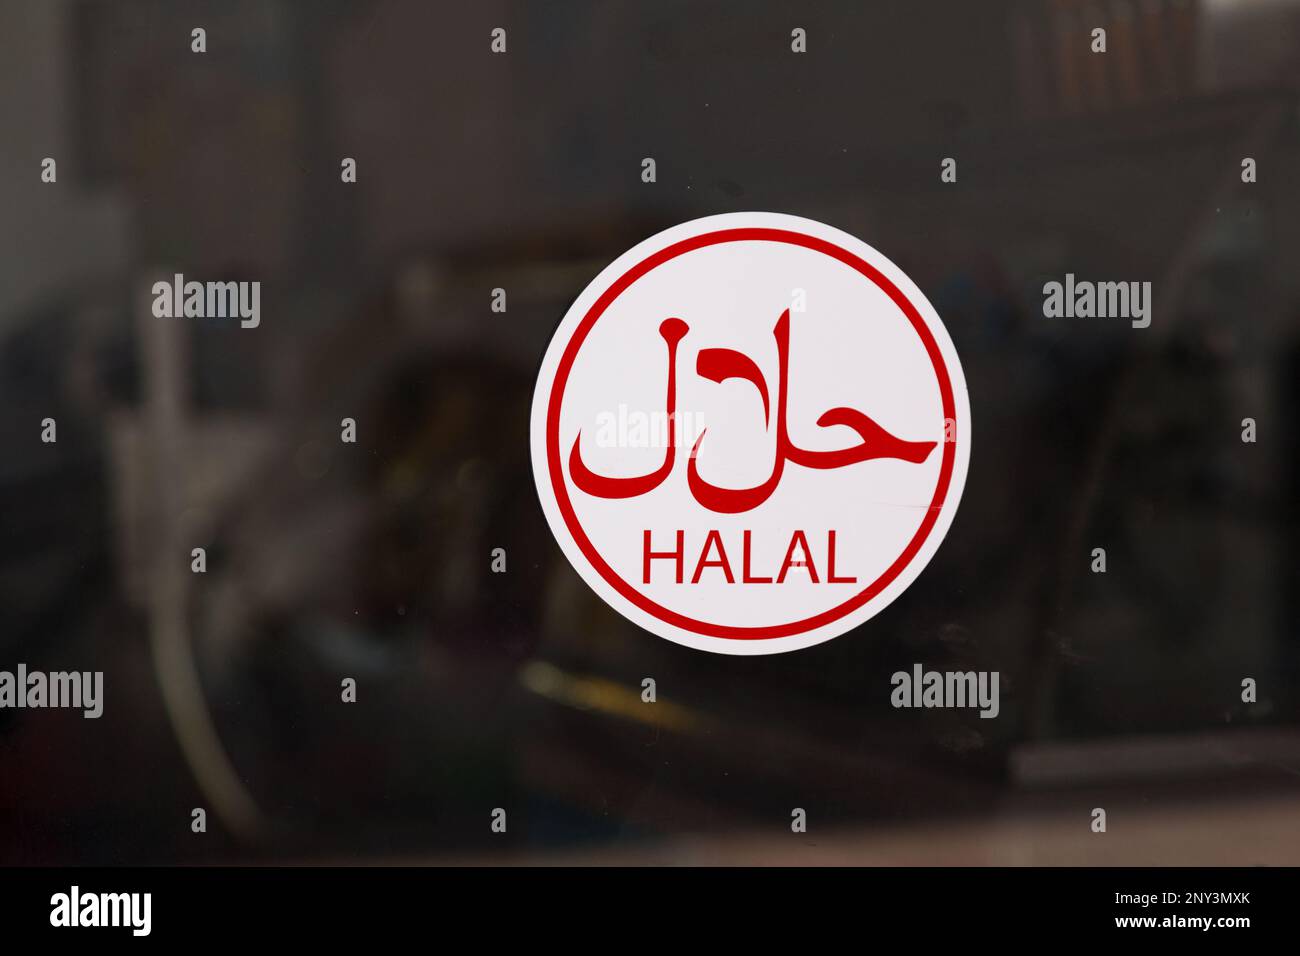 Circular sign in a window with written in arabic “حلال”, meaning “Halal”. Stock Photo